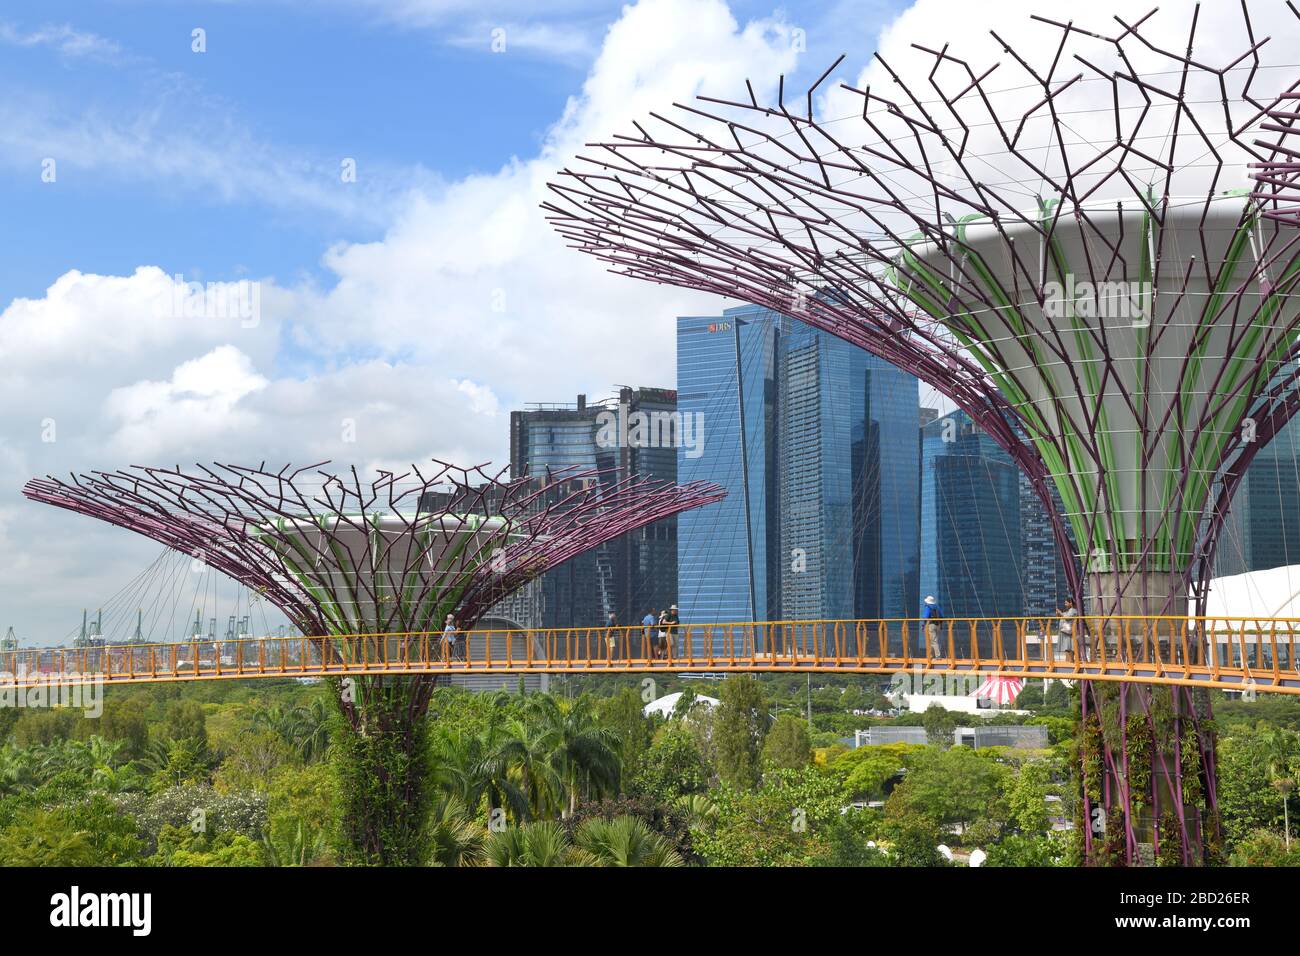 SUPERTREE GROVE et OCBC SKYWAY dans Gardens by the Bay, Singapour, Asie Banque D'Images